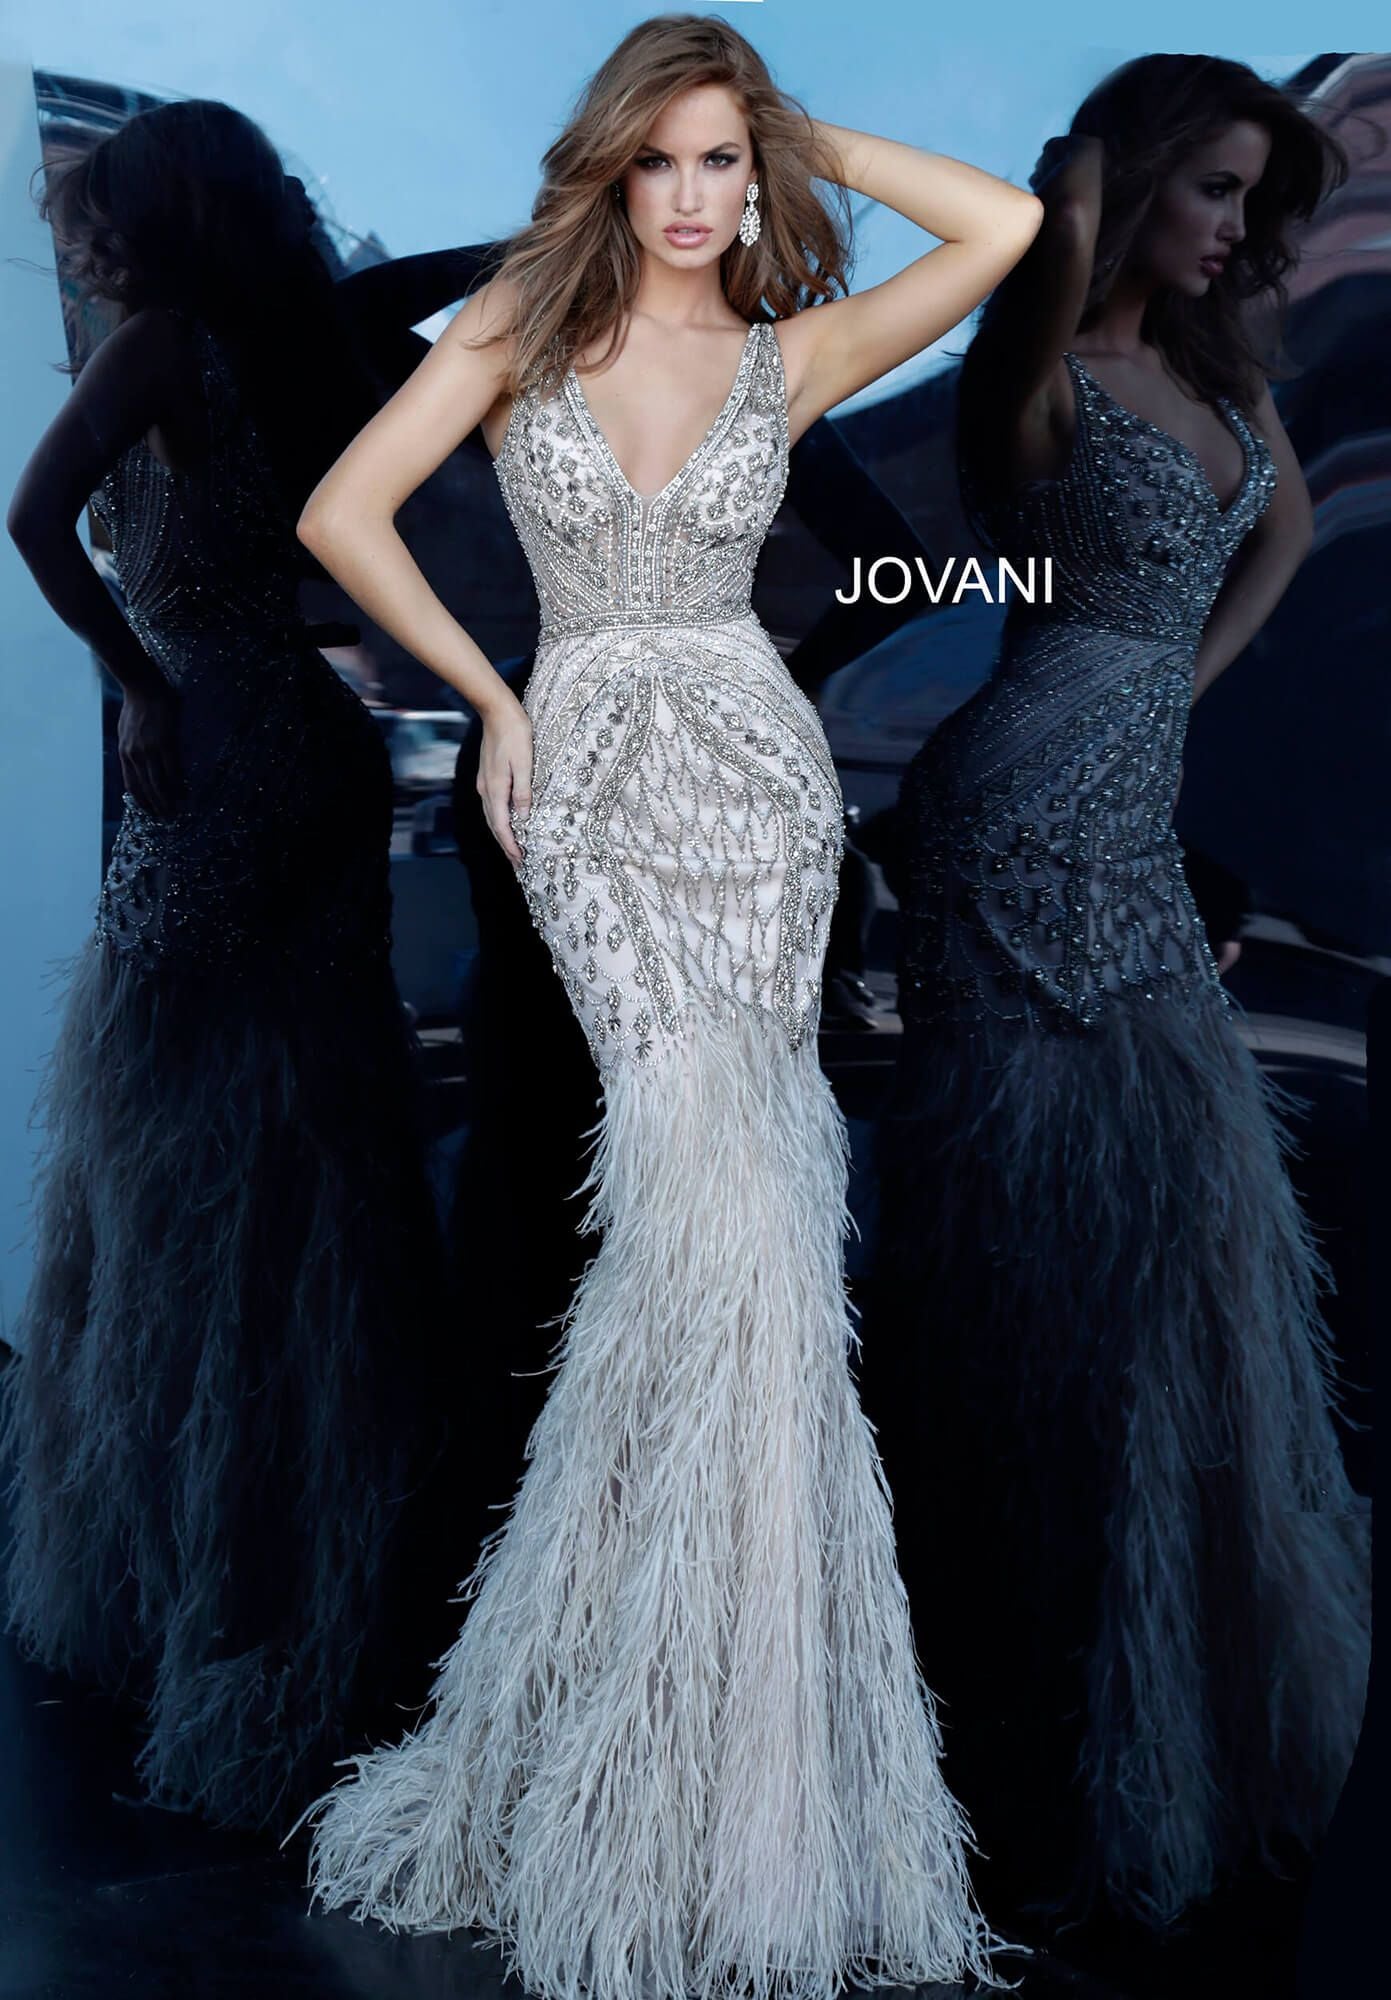 Jovani 5908 Prom Long Strapless Mermaid Dress for $310.99 – The Dress Outlet